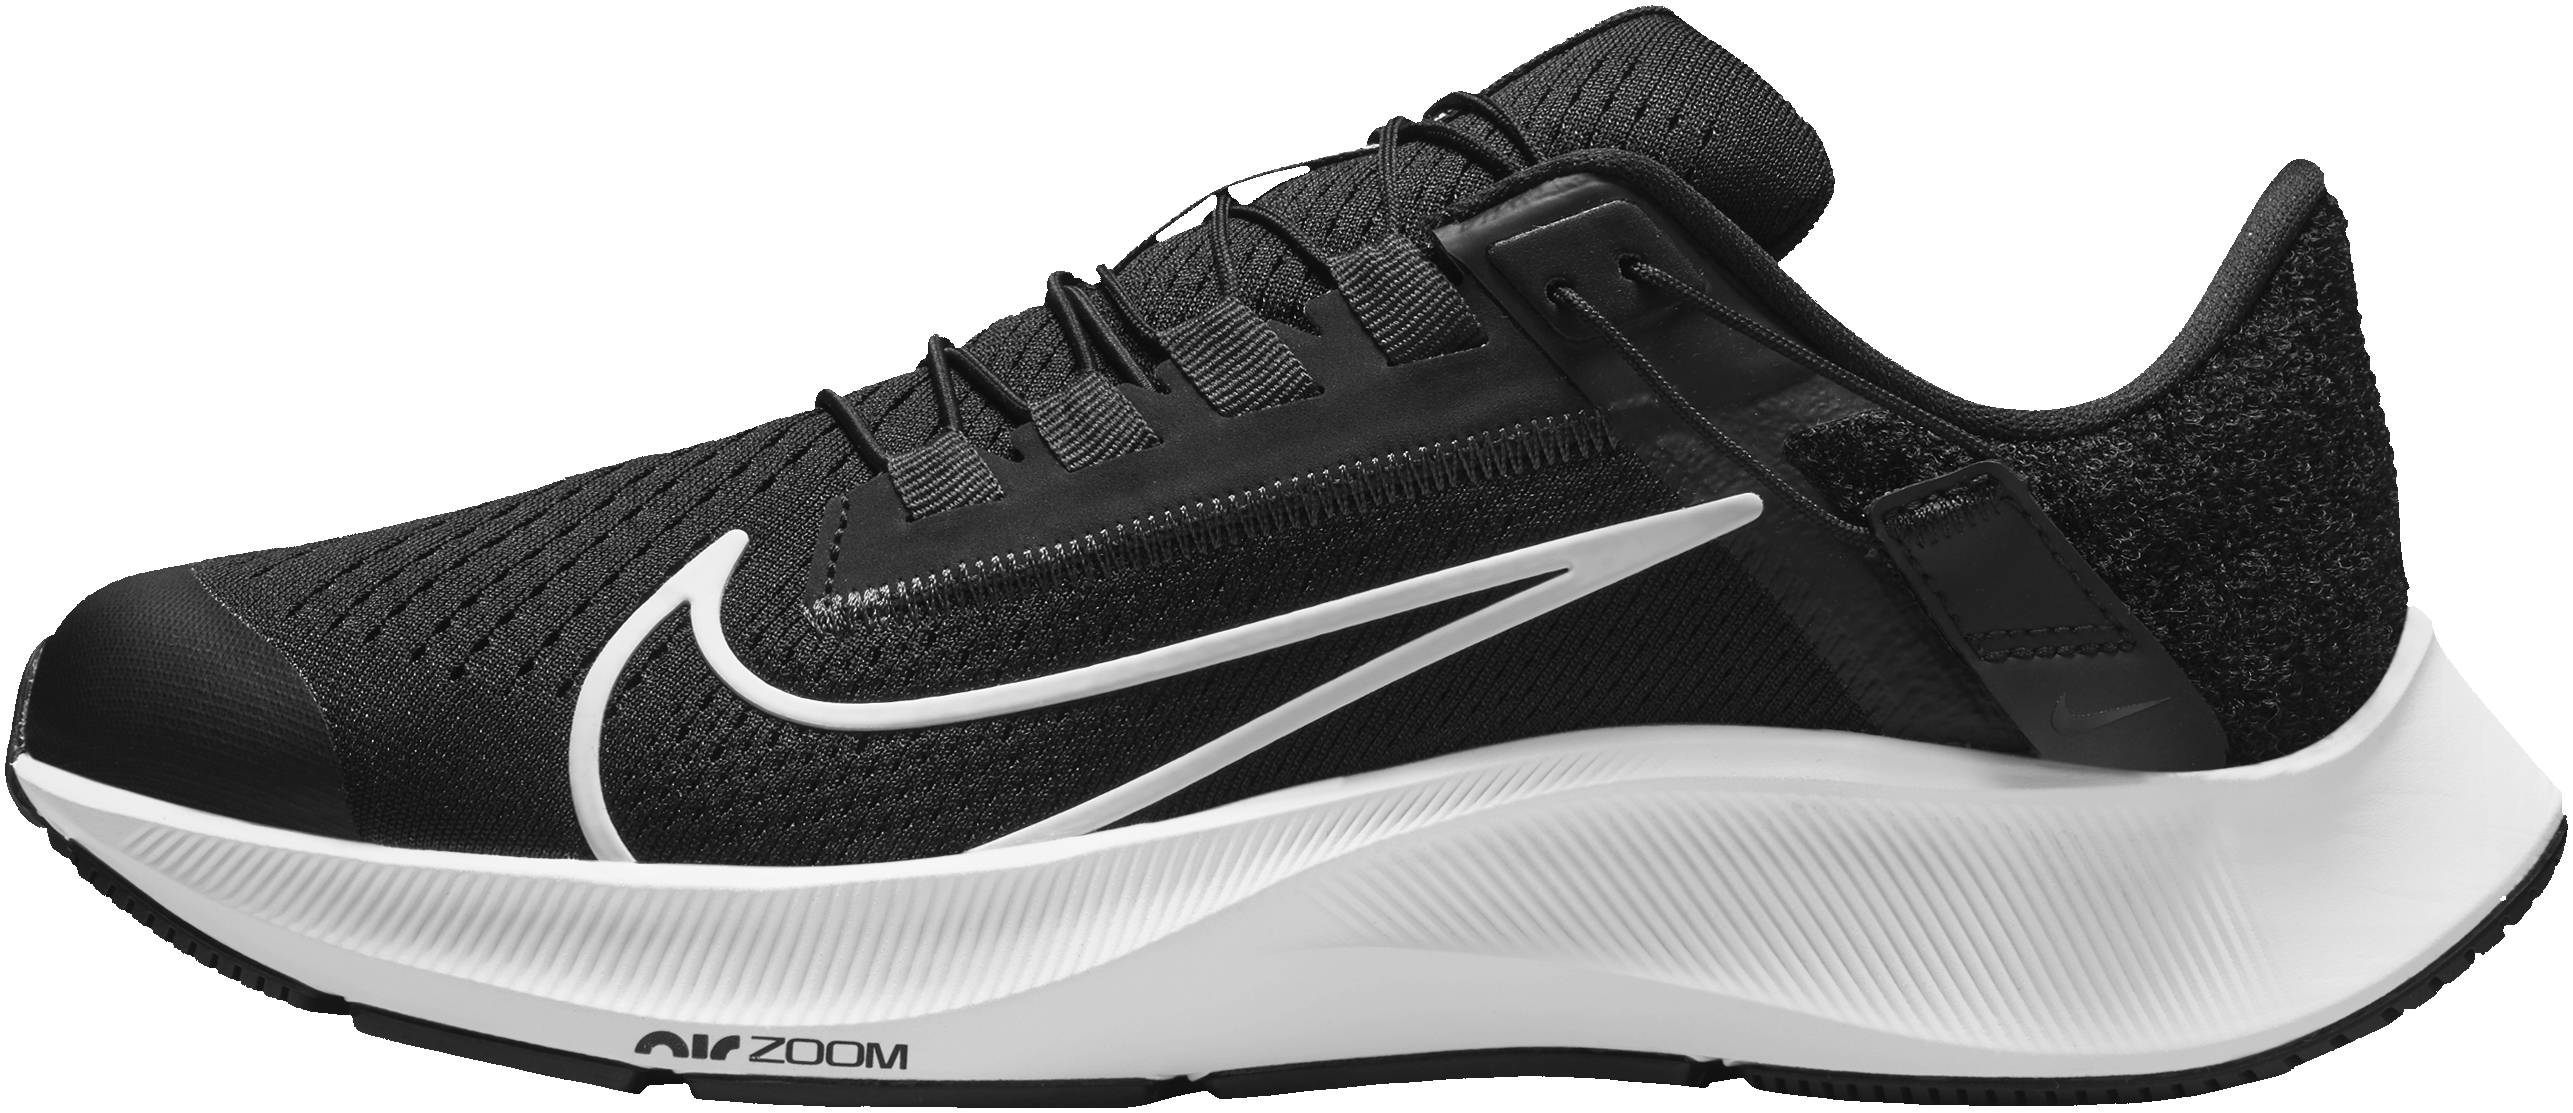 Nike Air Zoom Pegasus 38 FlyEase - Deals, Facts, Reviews (2021 ...